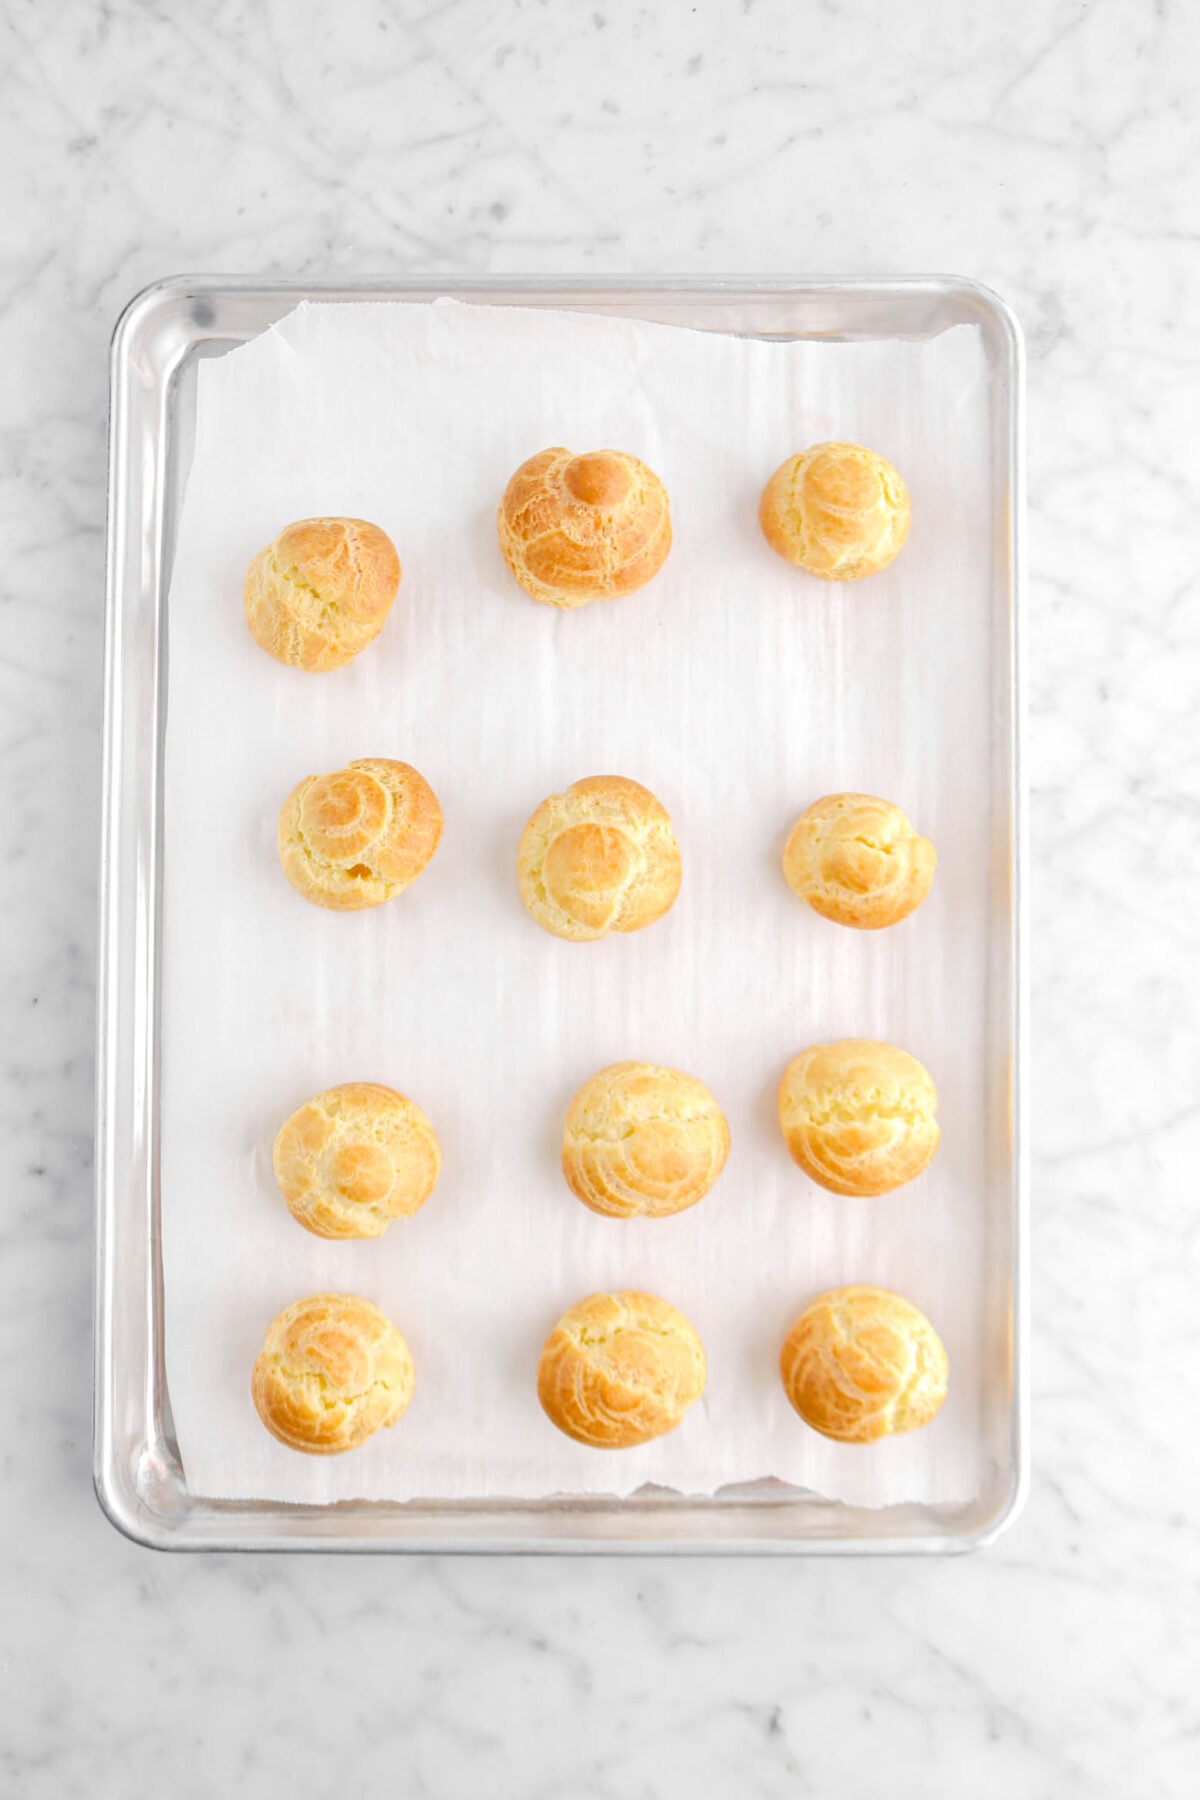 baked choux pastry on lined sheet pan